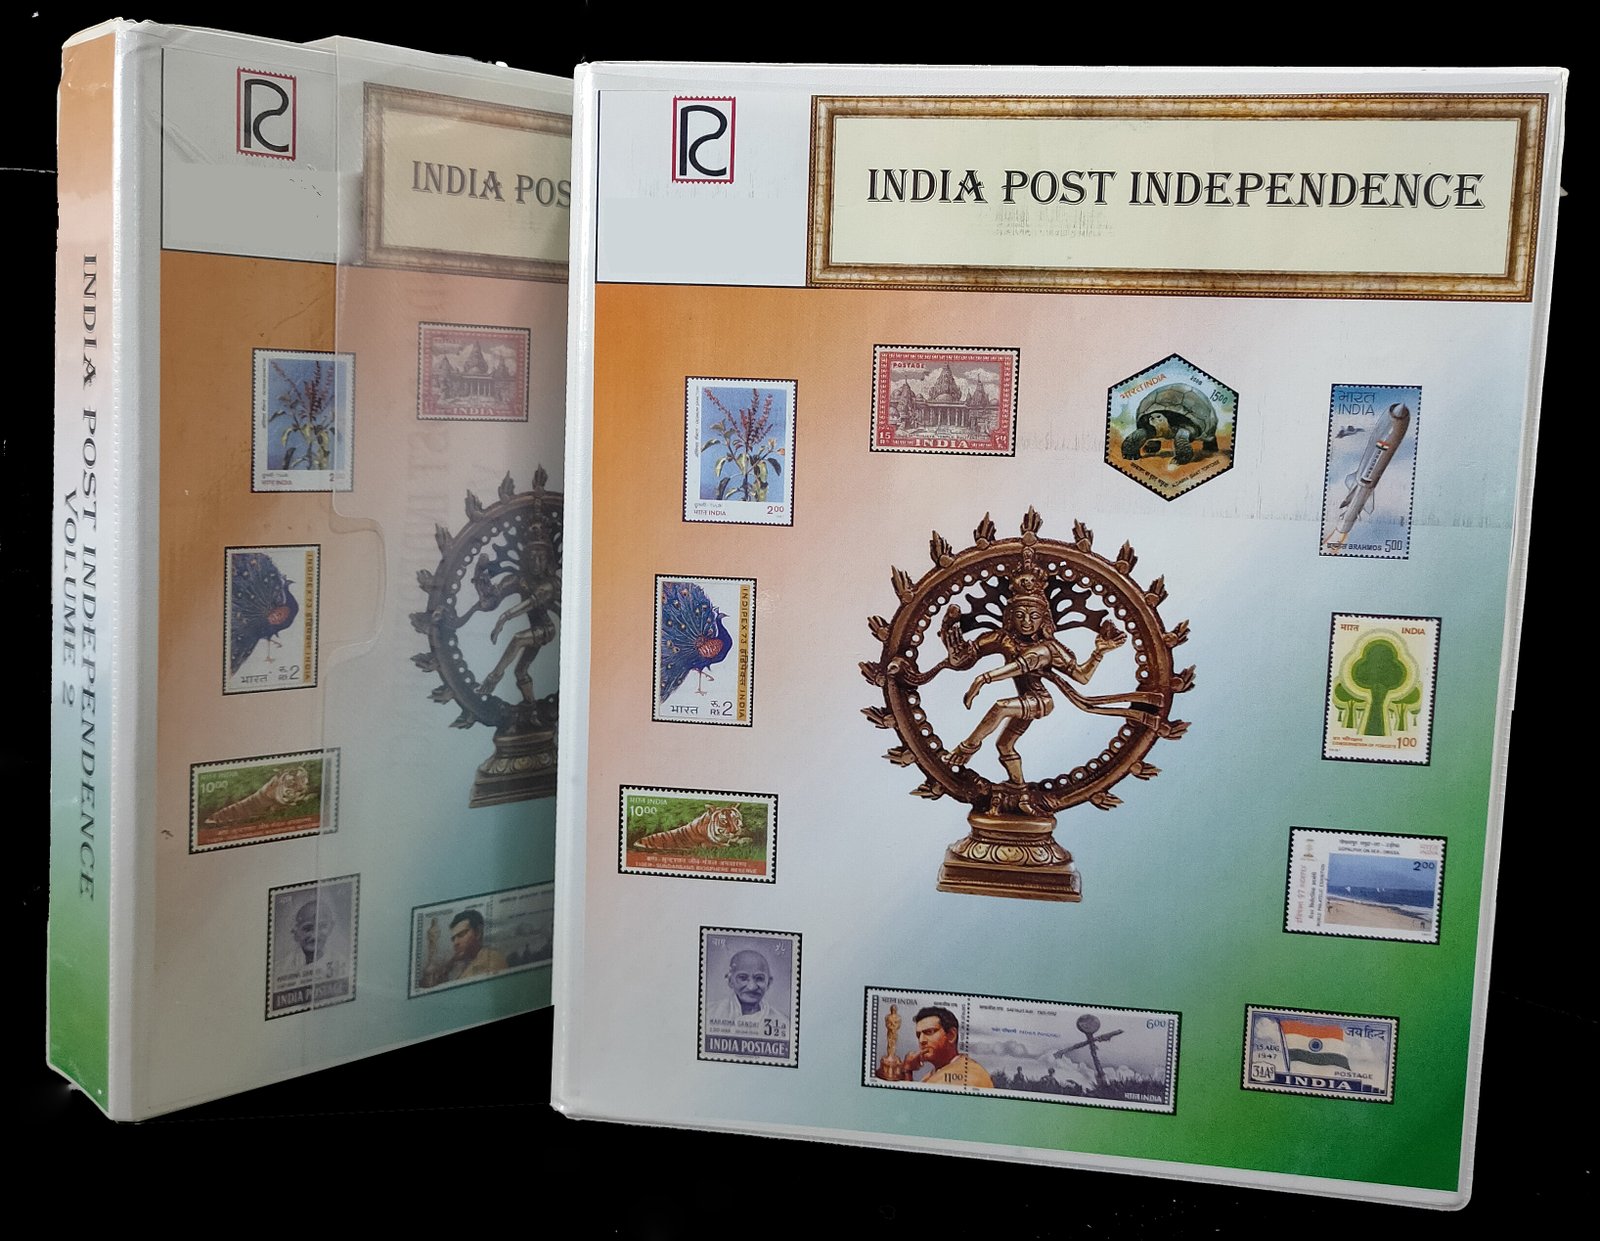 INDIA POST 1947-2019 including Definitive, Military Stamp Official 195 Pages-'A' Series�(ALBUM WITH ONLY ILLUSTRATIONS , STAMPS NOT INCLUDED WITH ALBUM)